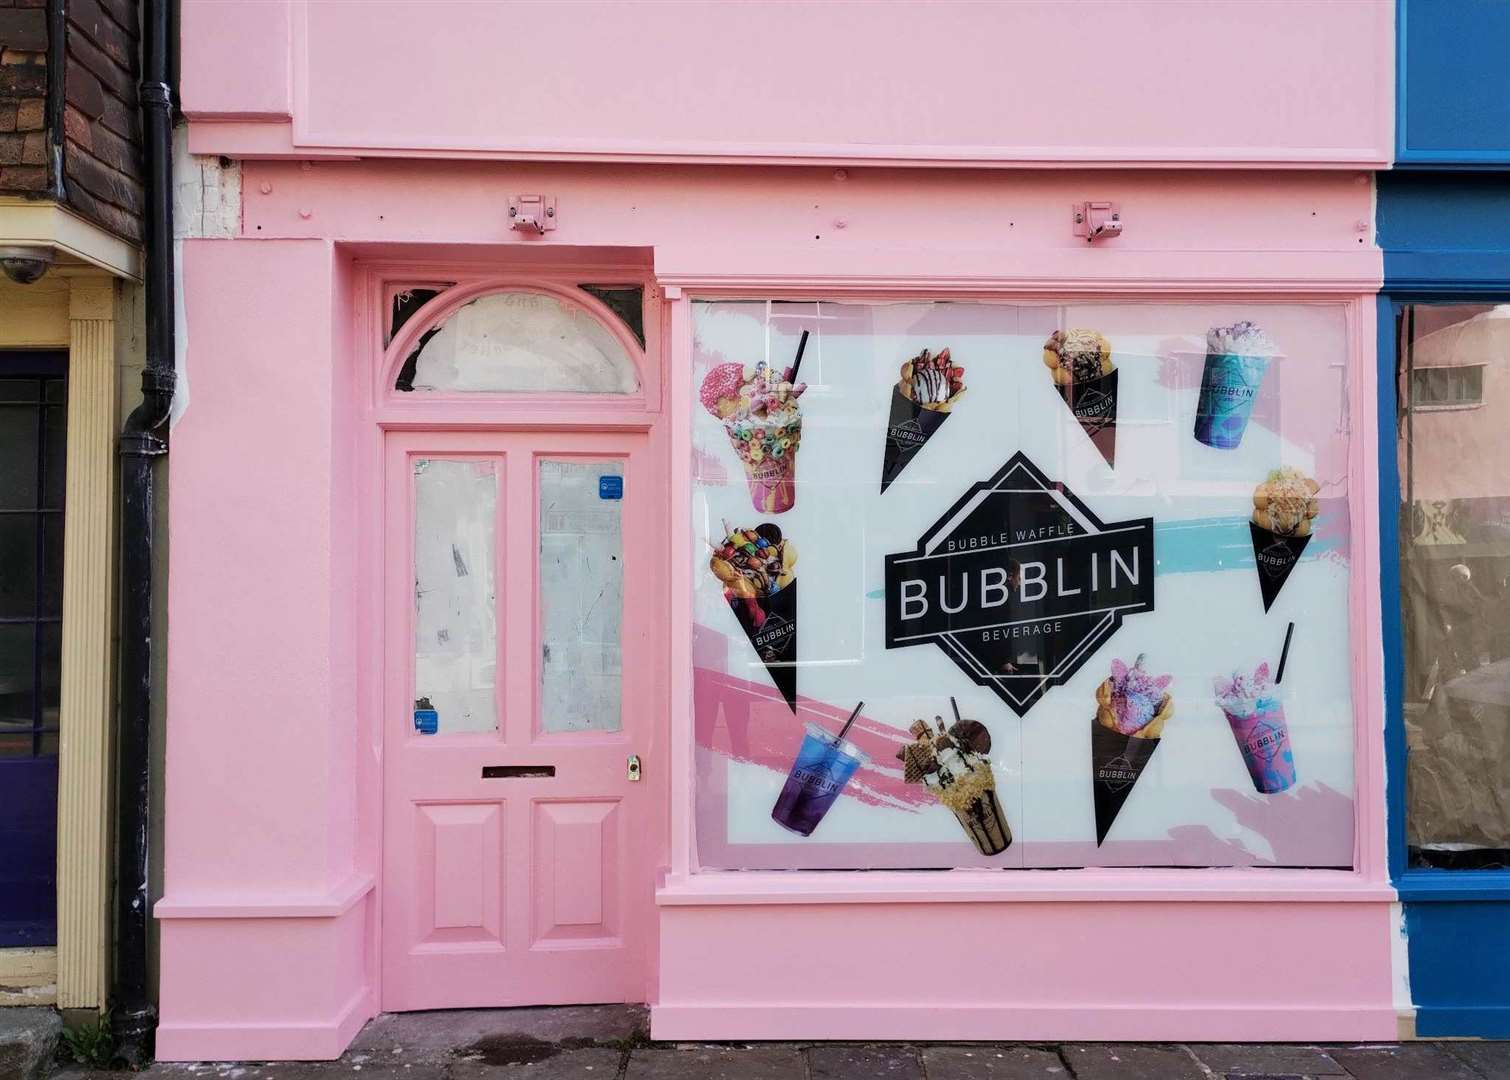 Bubblin Bubble Waffle and Beverage looks set to move into St Peter’s Street, Canterbury